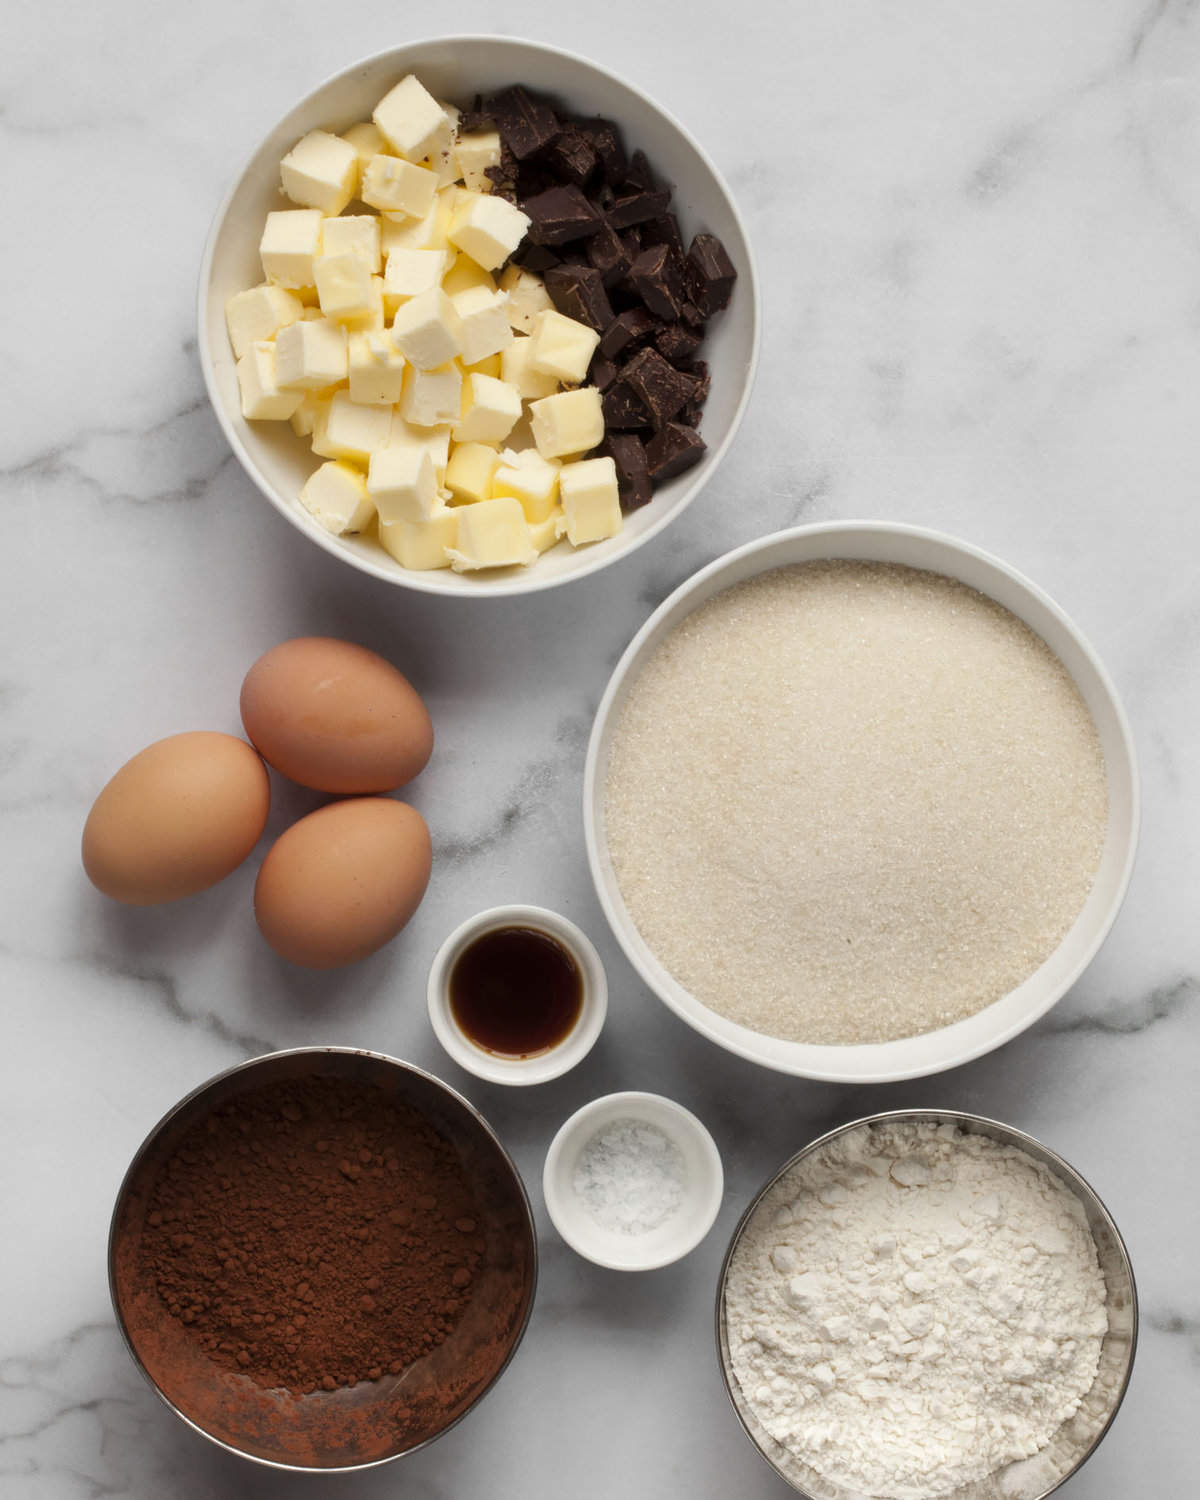 Ingredients including chocolate, butter, sugar, cocoa powder, eggs, flour and vanilla extract.